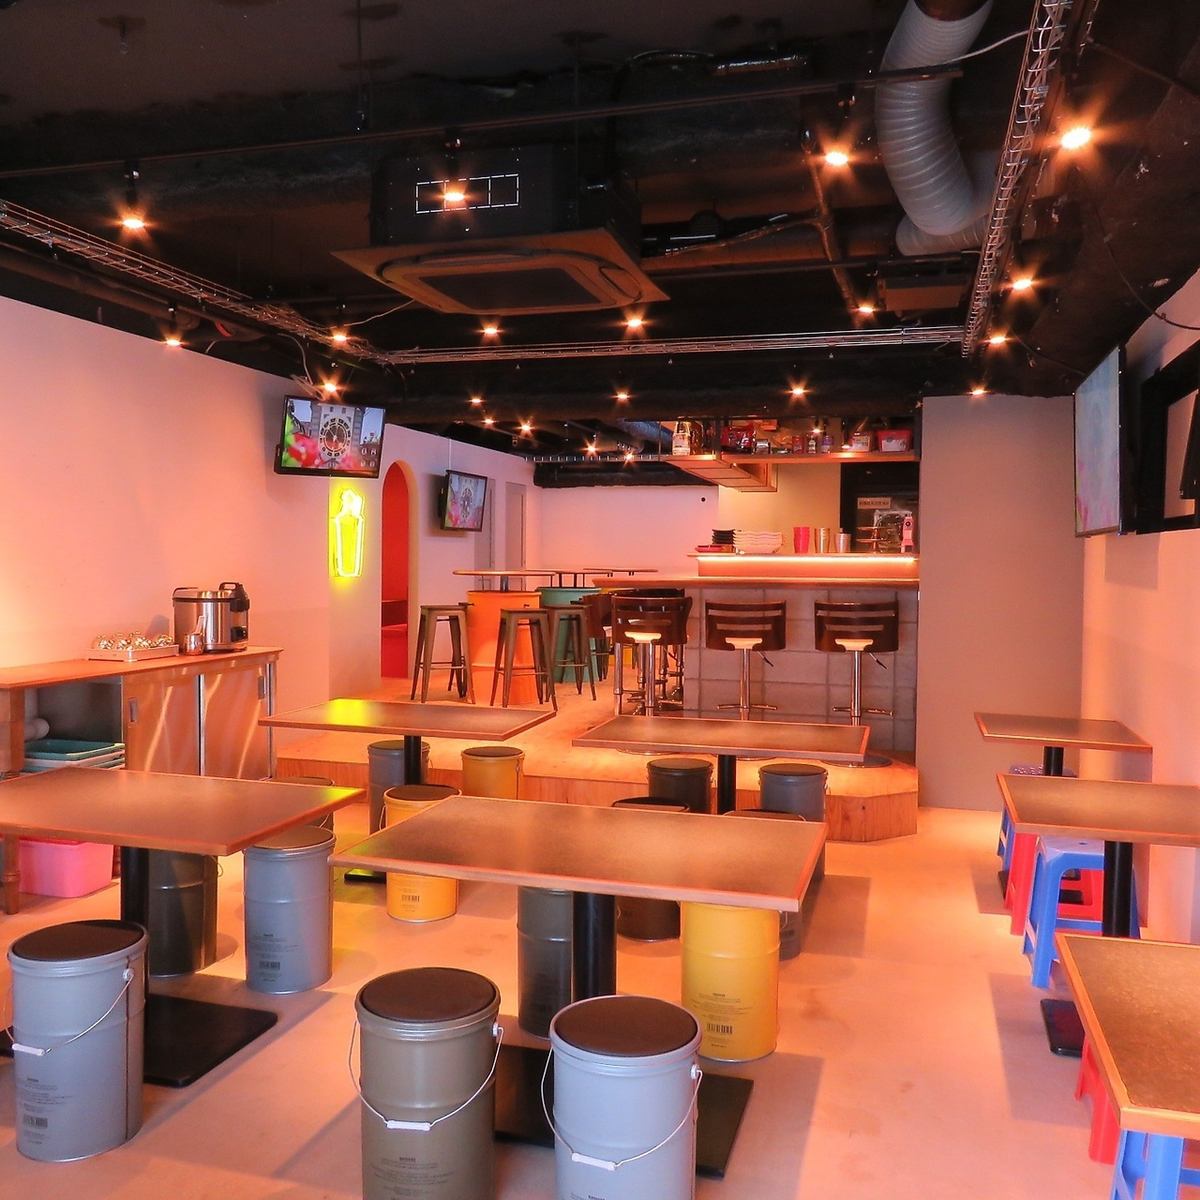 #Topic on Instagram !! Authentic Korean Izakaya Bar ♪ There is no doubt that it will look great on Instagram ♪